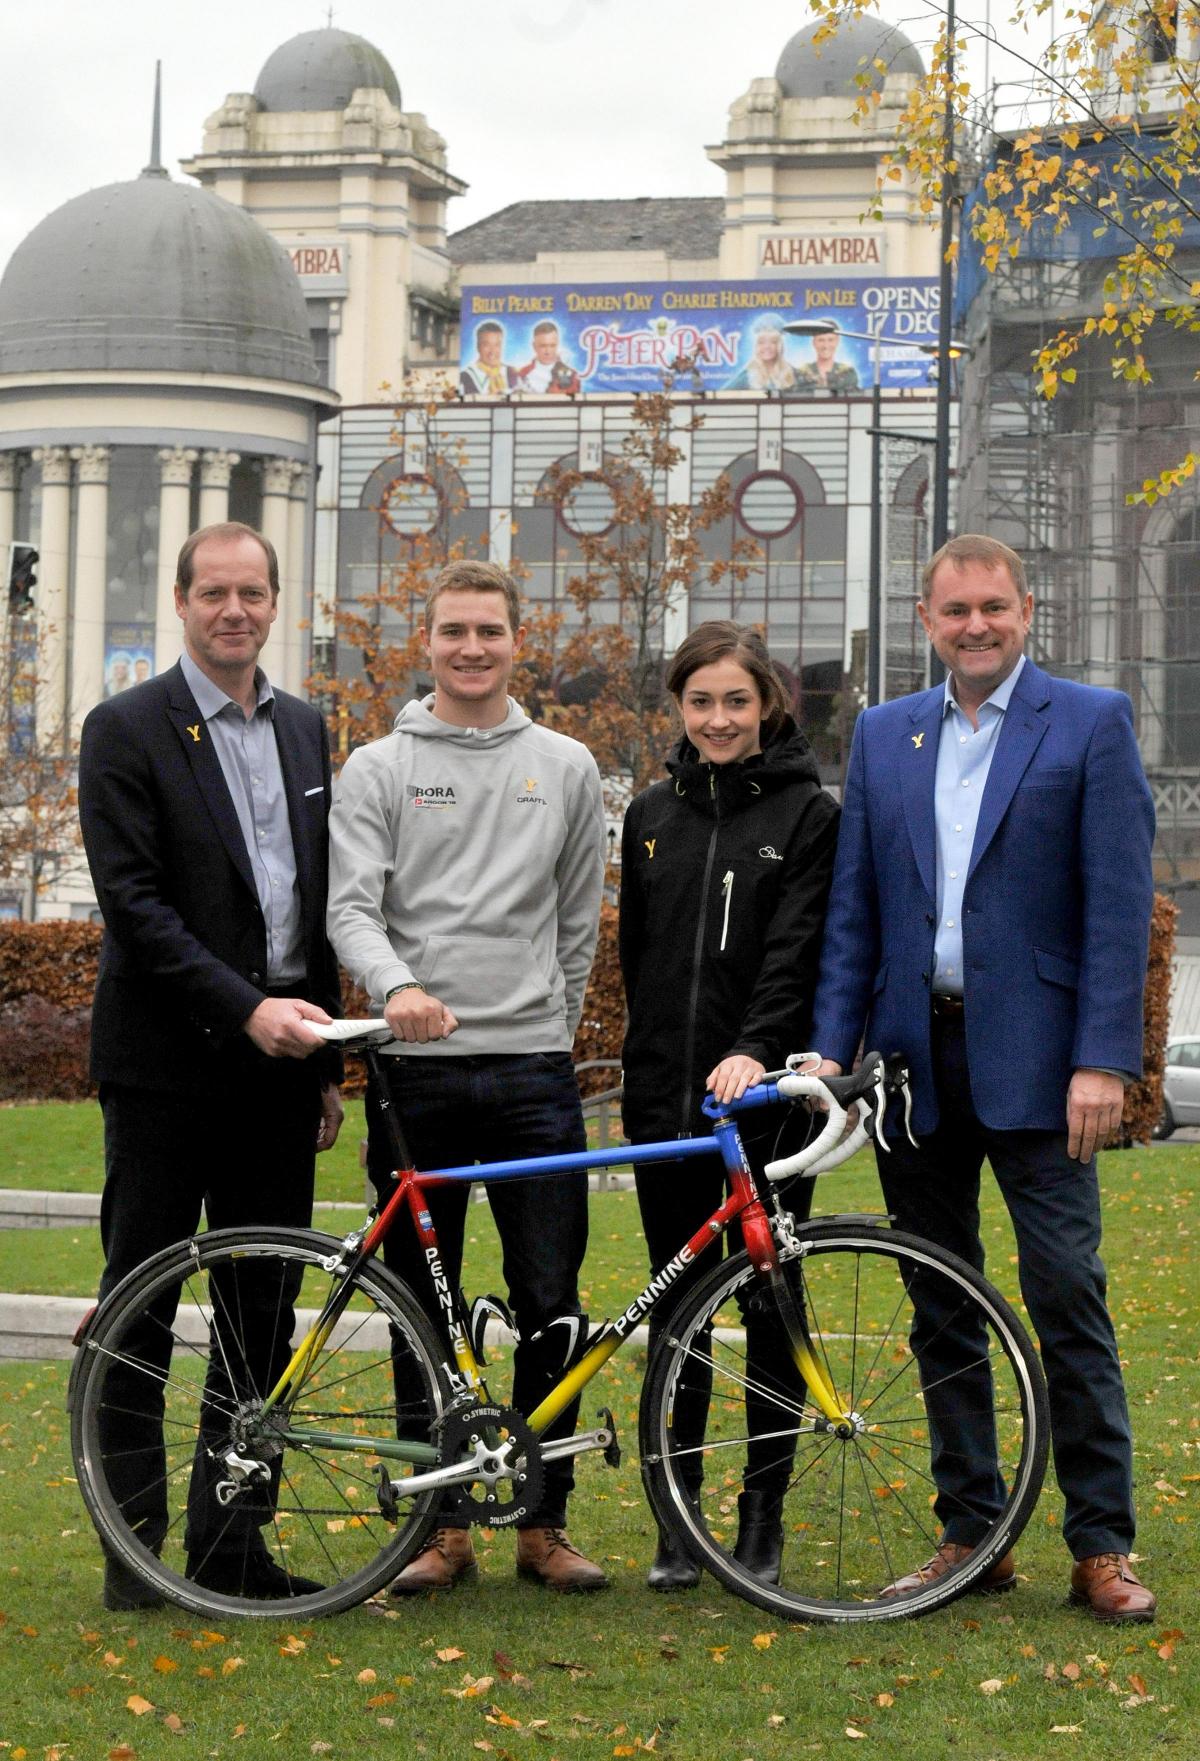 Tour de France Director Christian Prudhomme with pro cyclists Scott Thwaites and Grace Garner, and Welcome to Yorkshire chief executive Gary Verity outside the Alhambra in Bradford